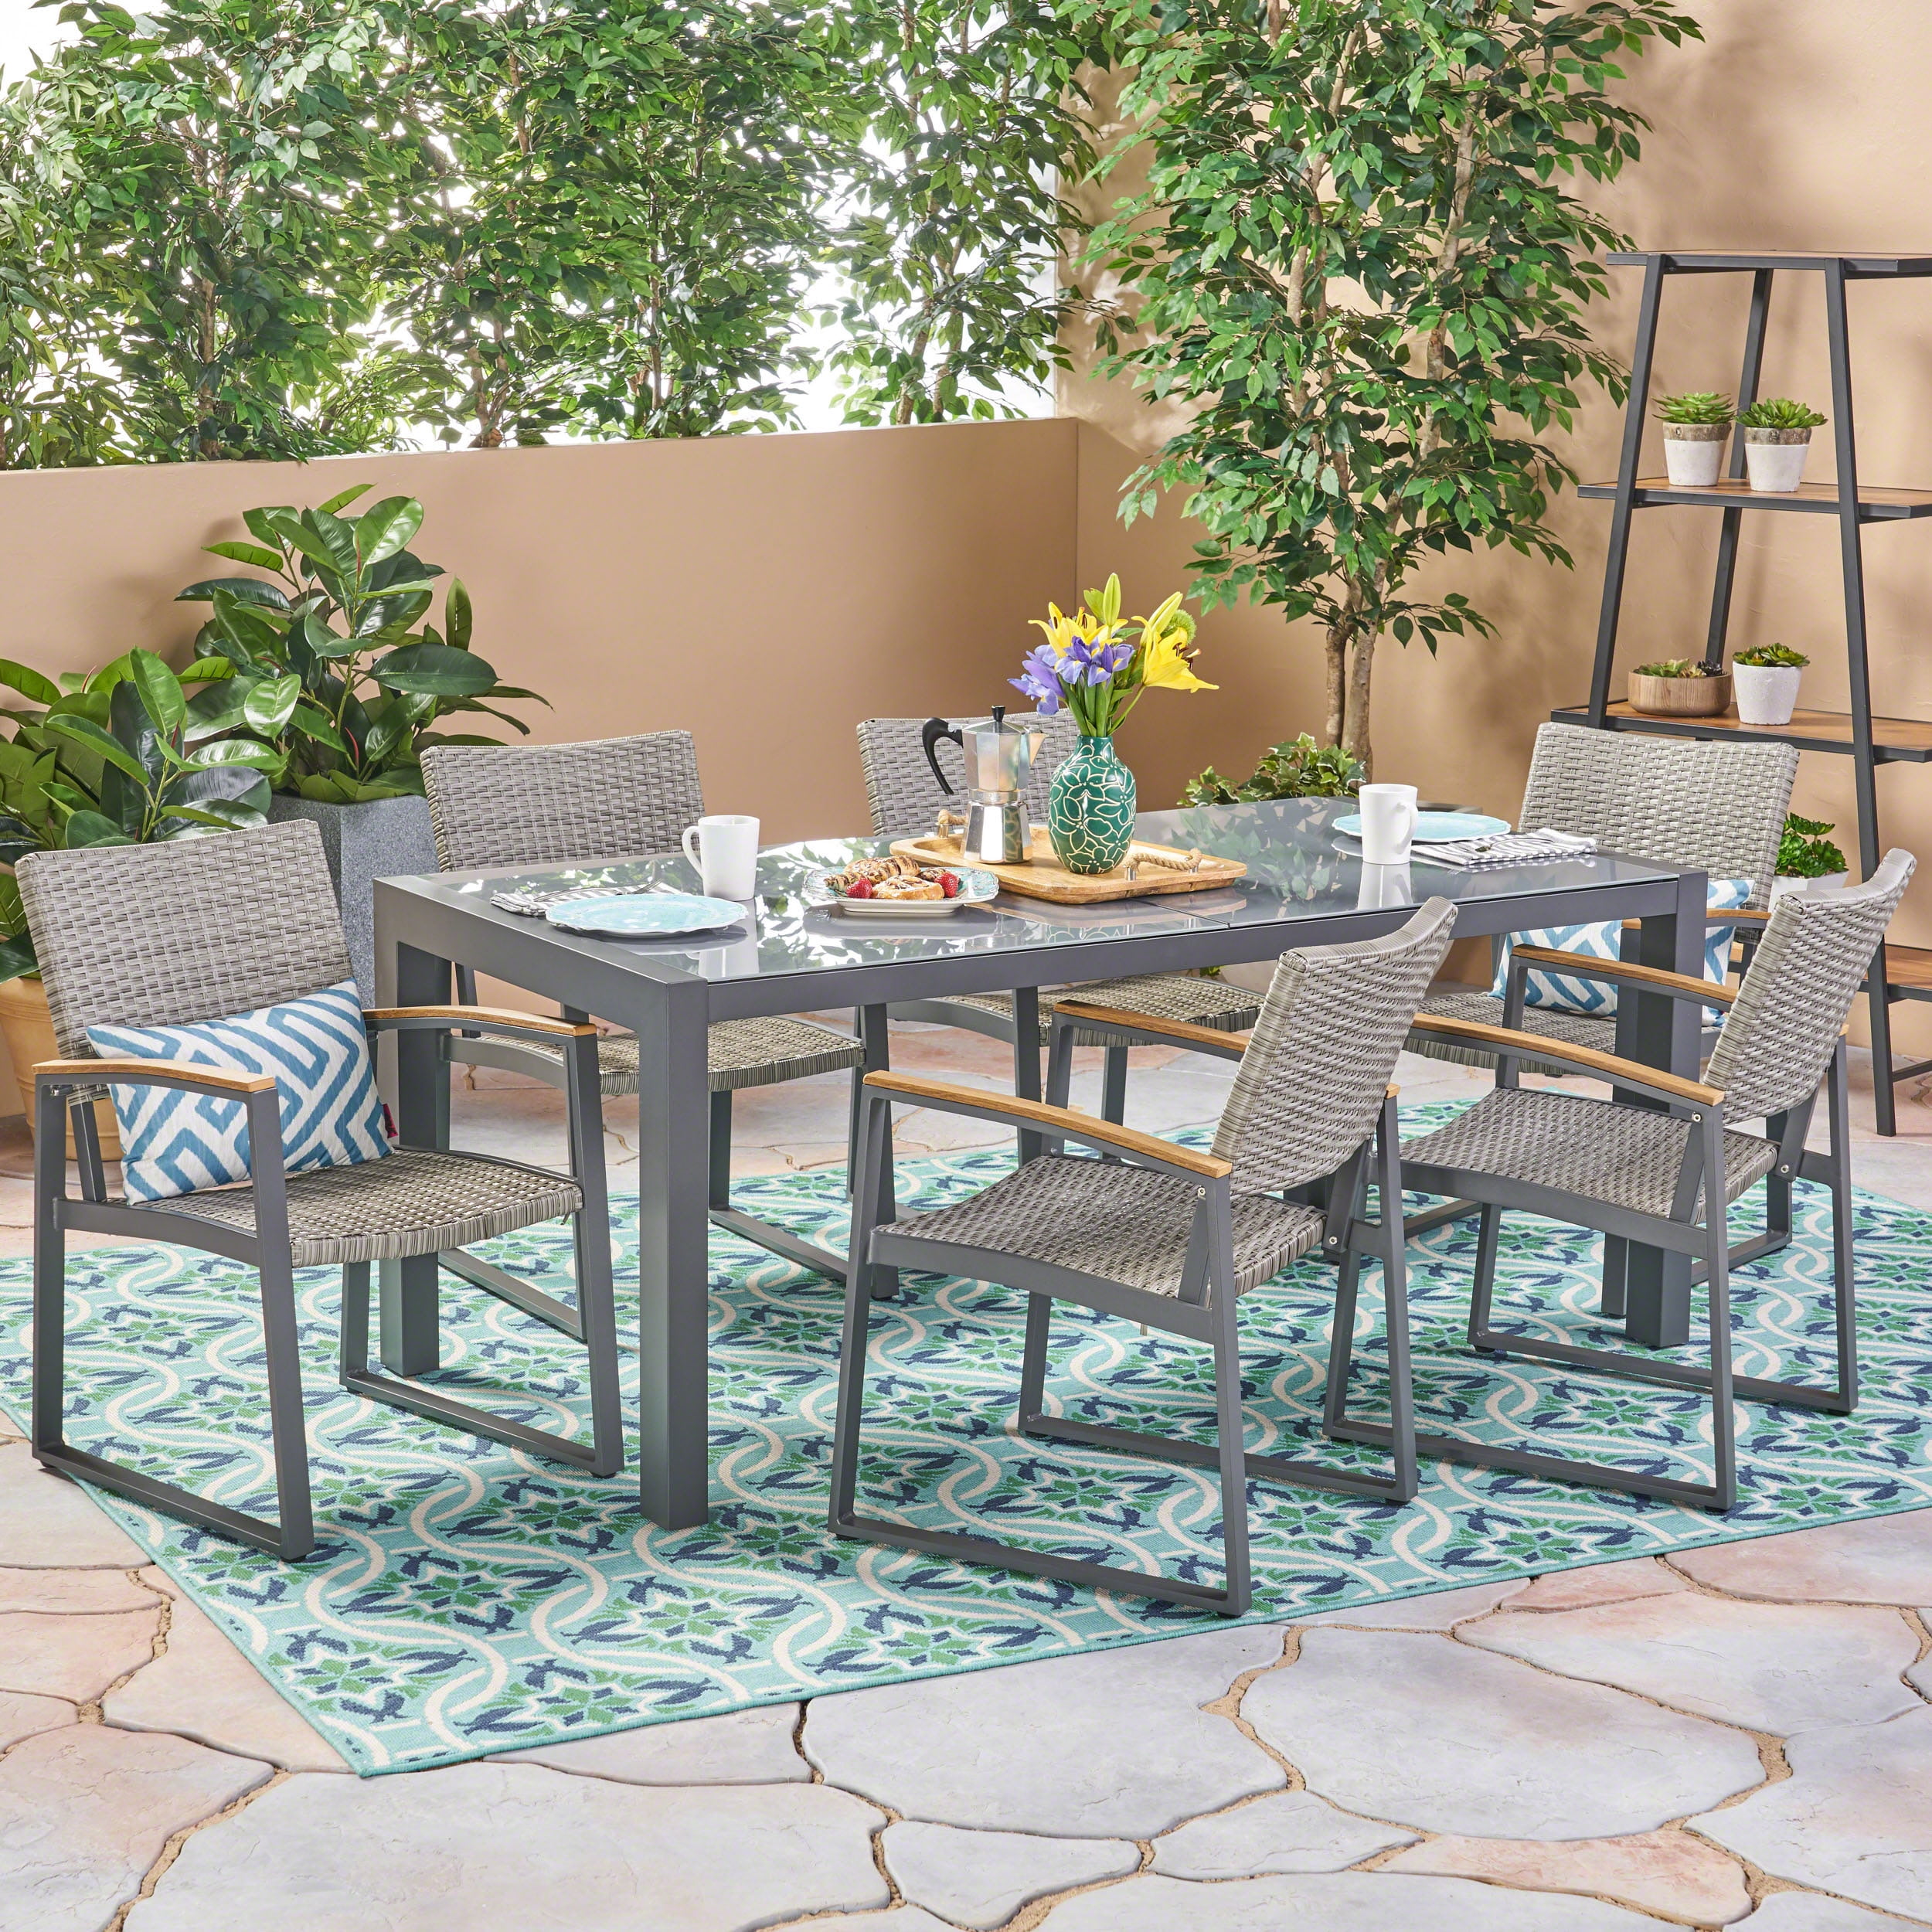 Crane Outdoor 7 Piece Aluminum and Wicker Dining Set with Glass Table ...